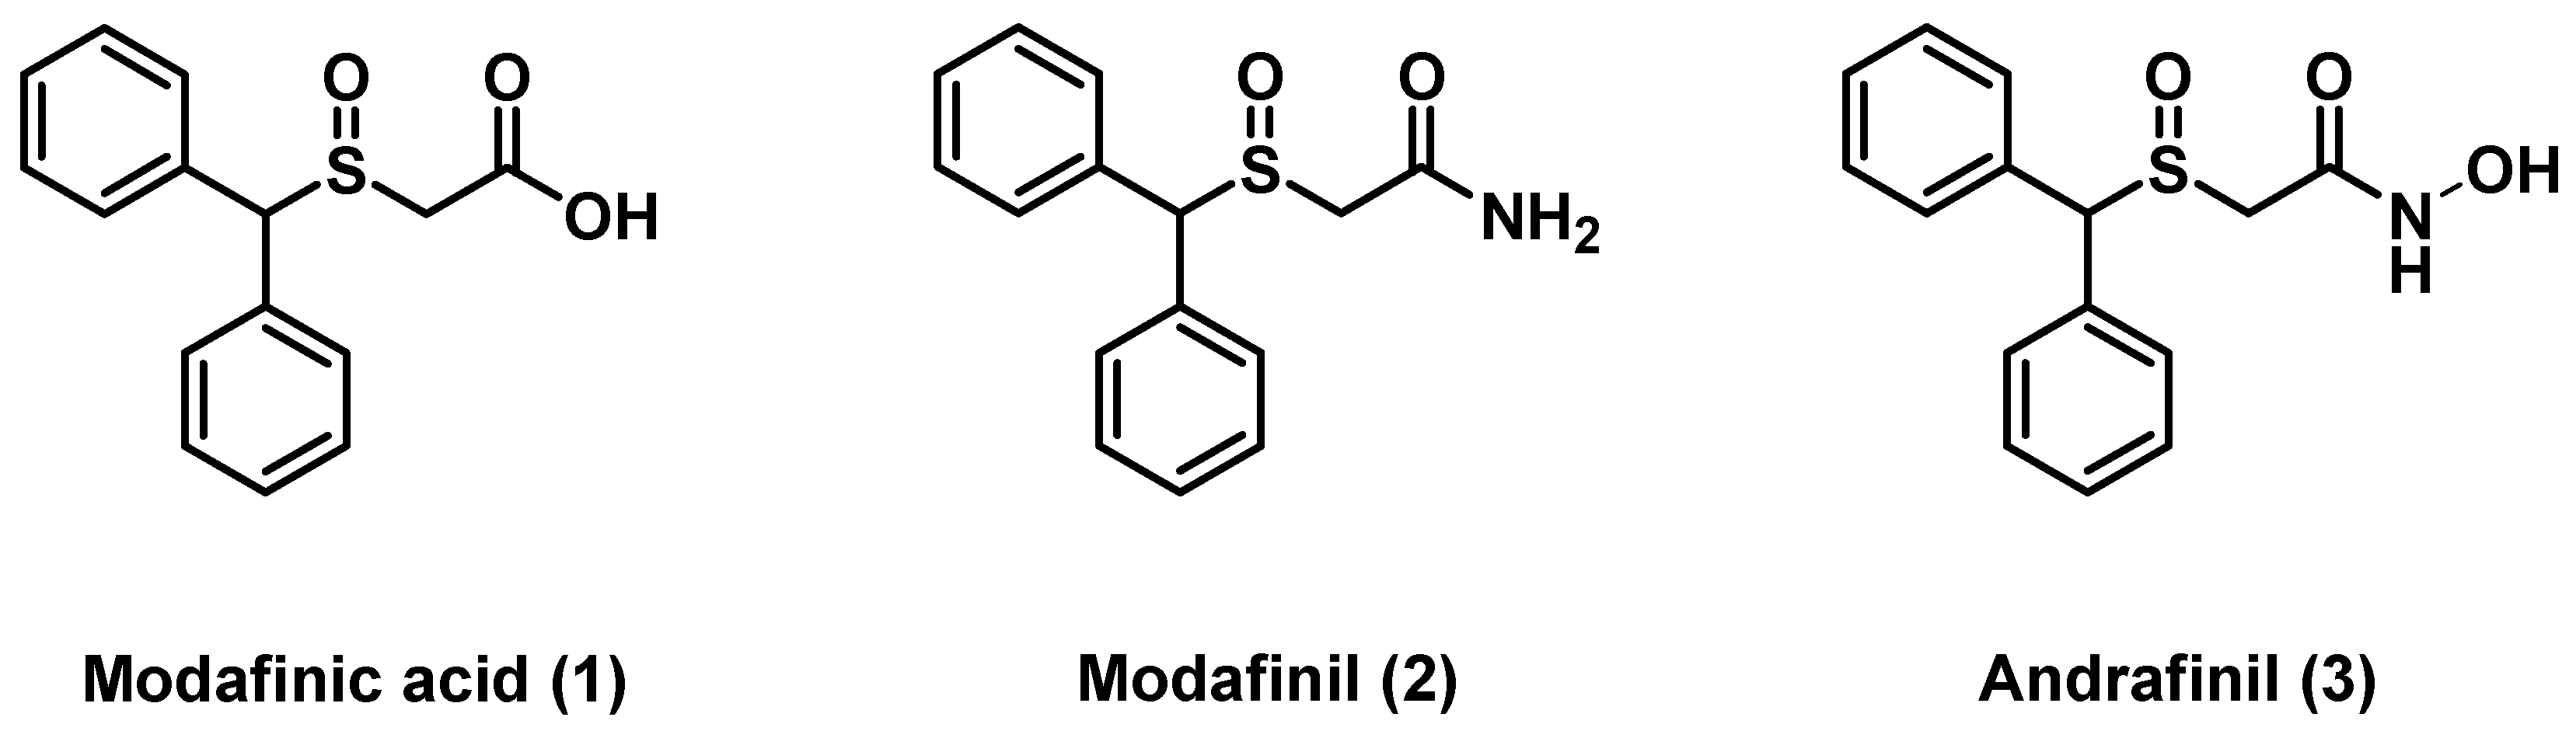 Modafinil Vs Adderall: Safety And Efficacy